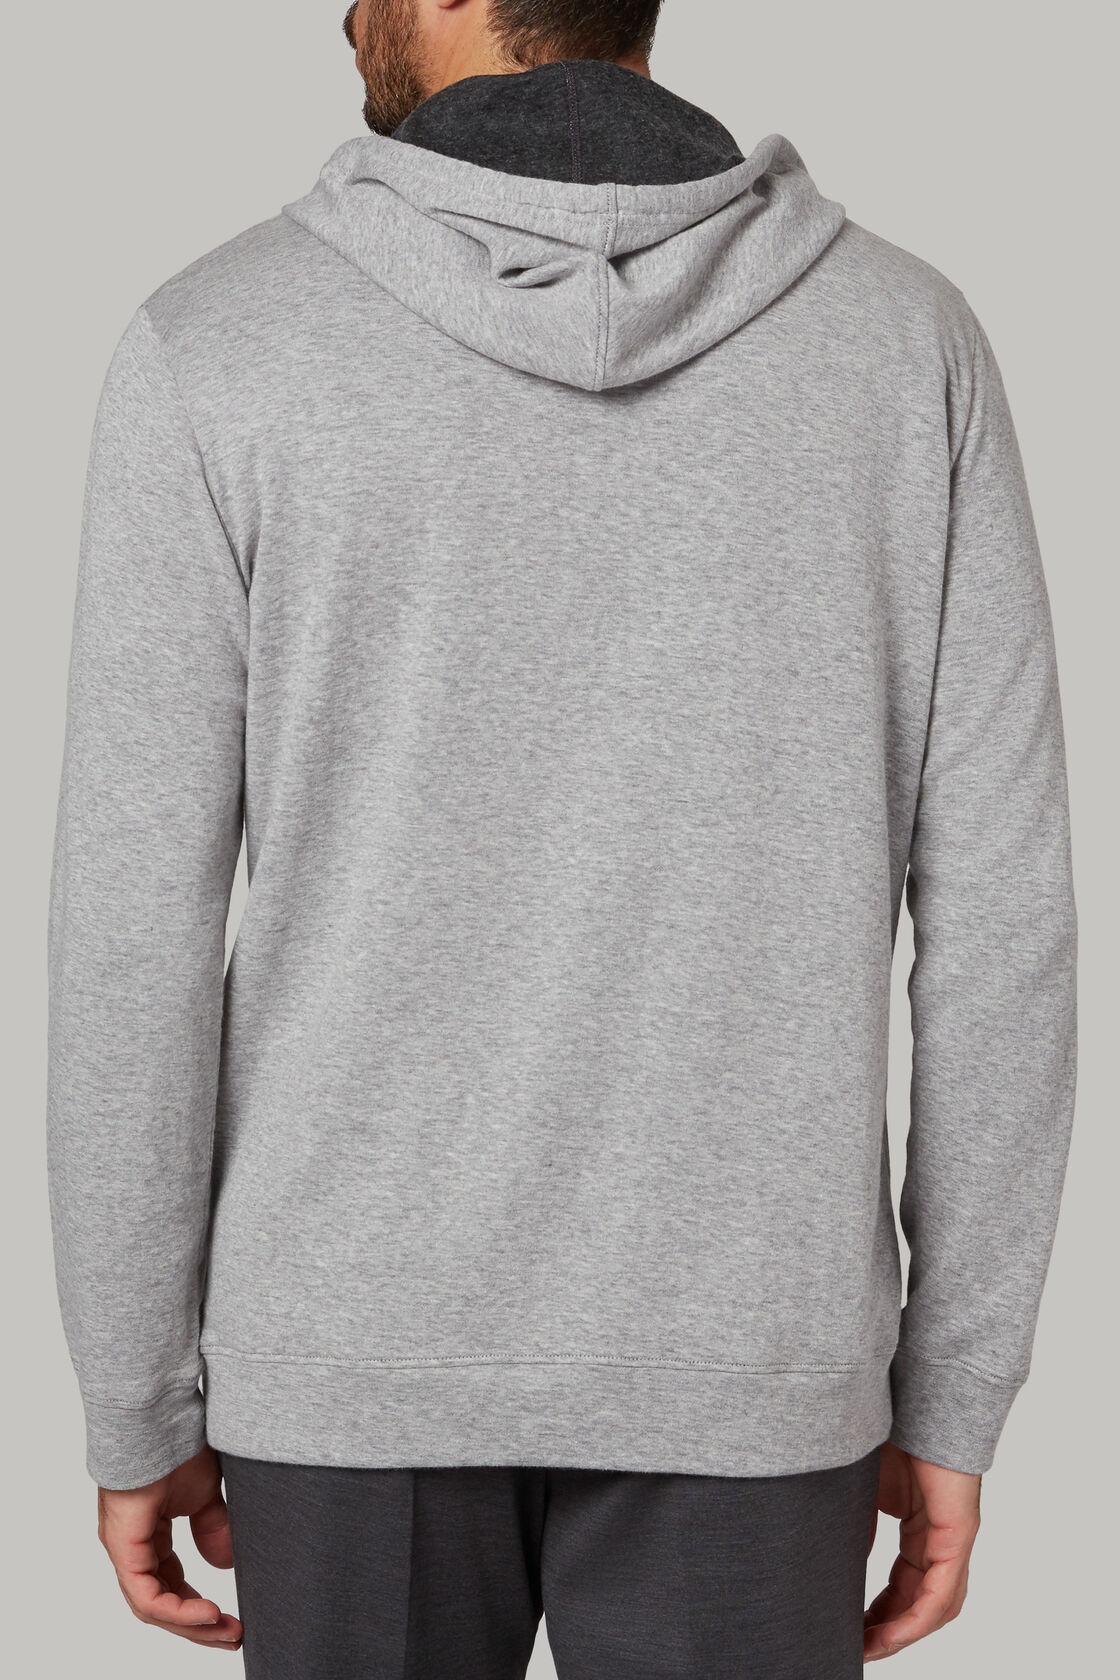 Double-sided cotton and cashmere hooded sweatshirt | Boggi